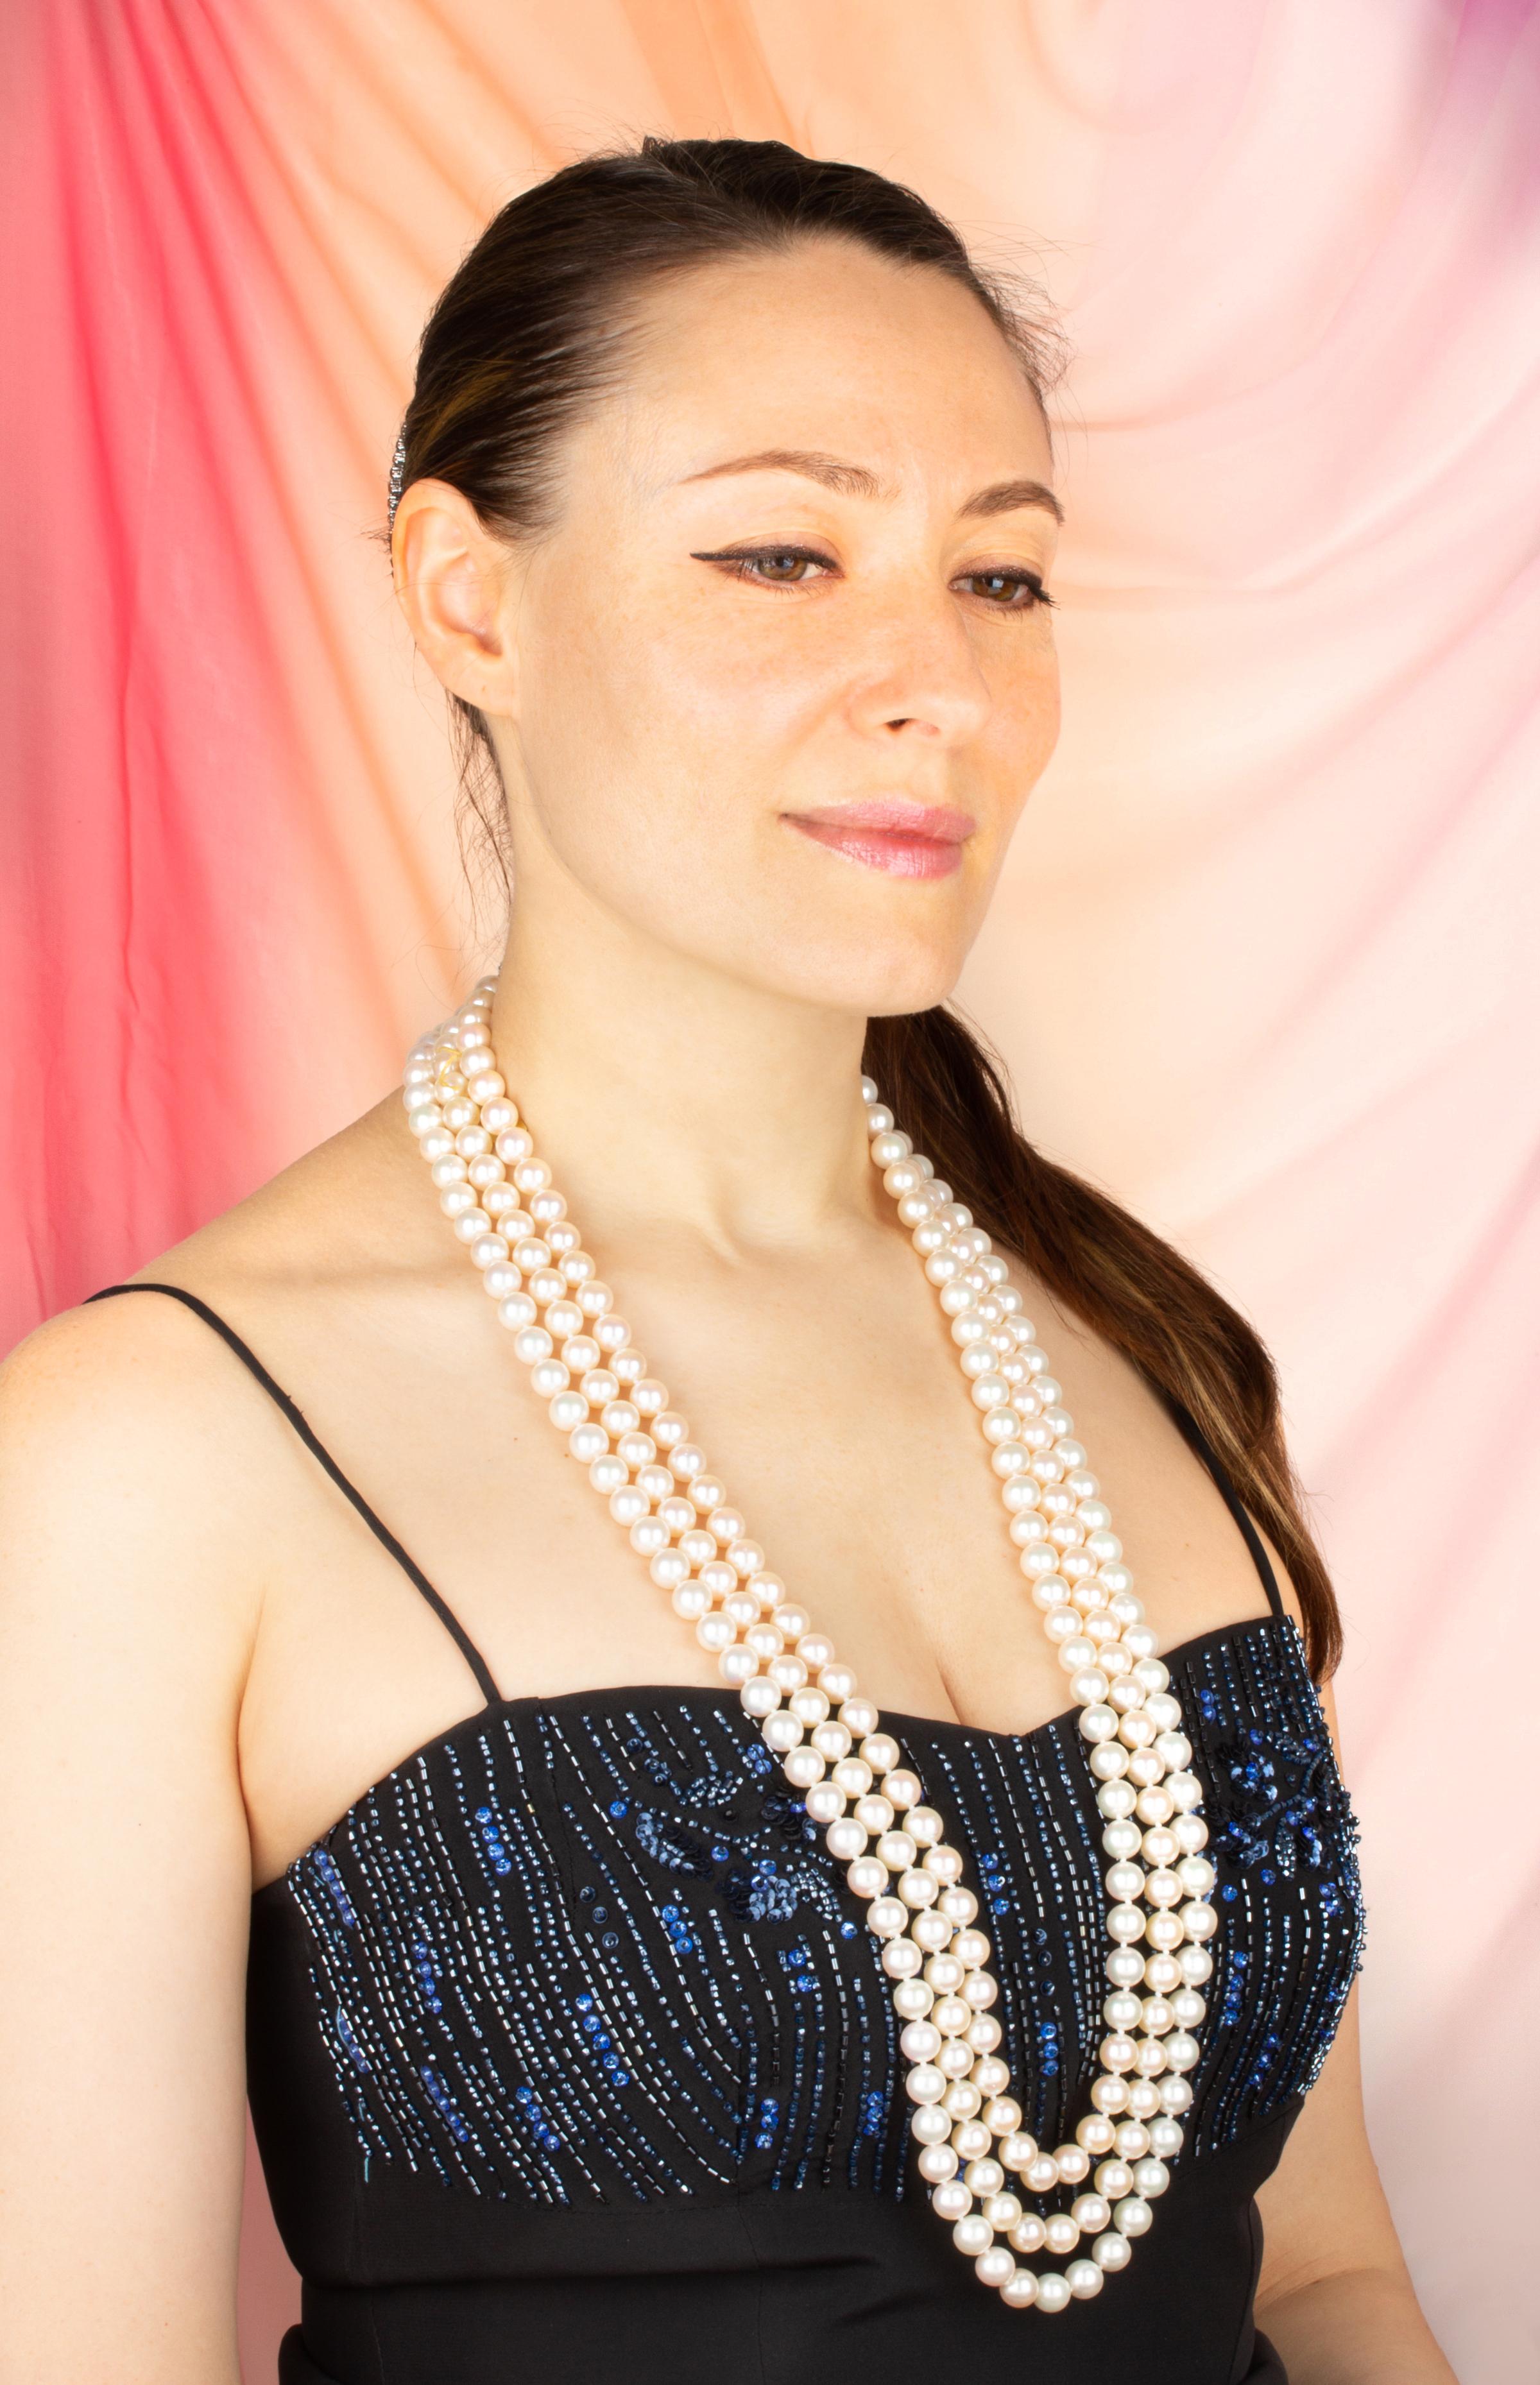 The opera length triple pearl necklace set consists of 6 original strands of Japanese pearls of lovely nacre, lustre, and iridescence. The pearls are homogeneous and measure 10/9.5mm in diameter and were extracted from Akoya shells. The 3 strands